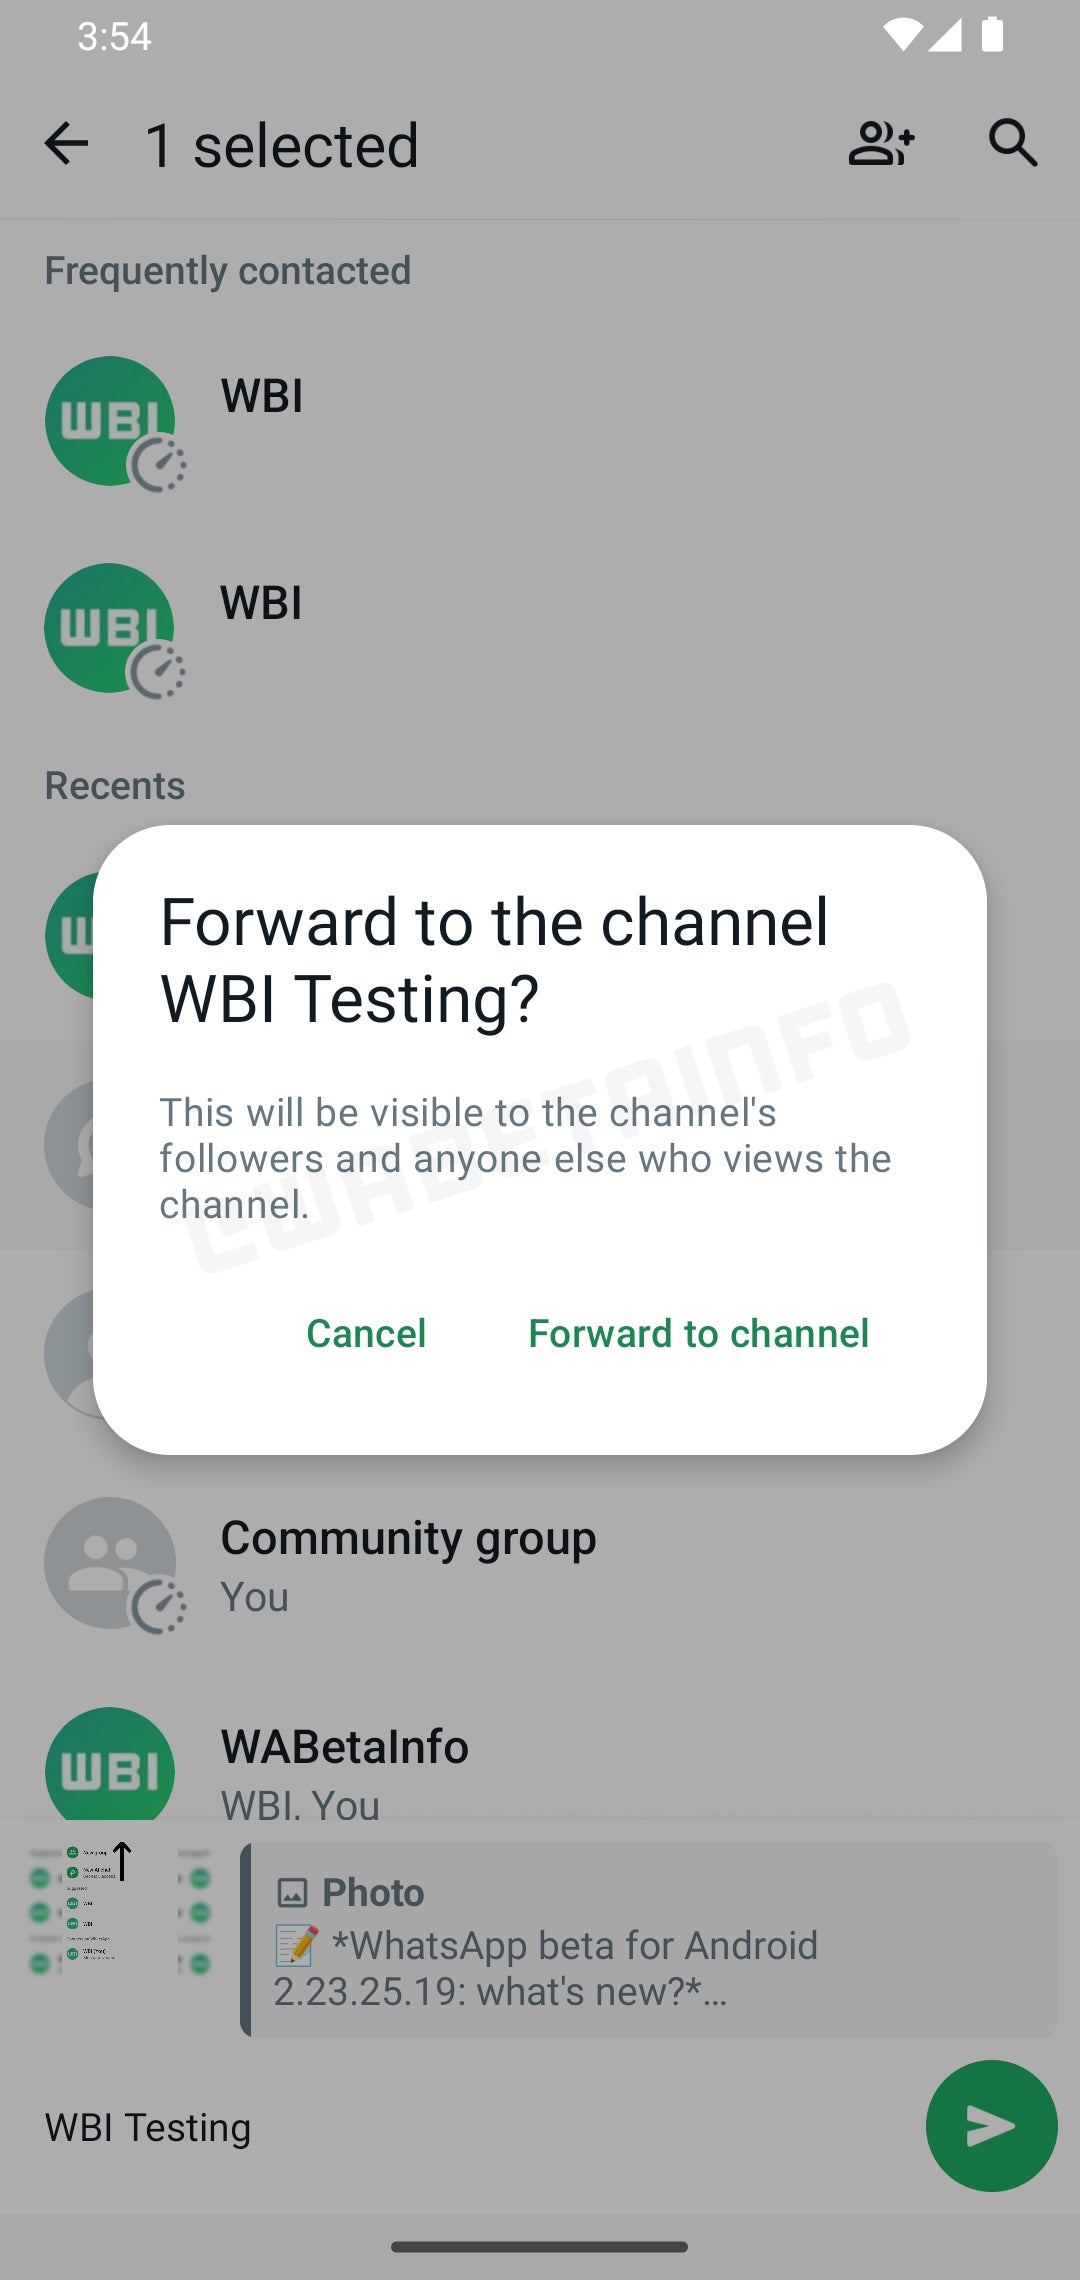 Image credit – WABetaInfo – WhatsApp will allow messages to be forwarded to channels in an upcoming update